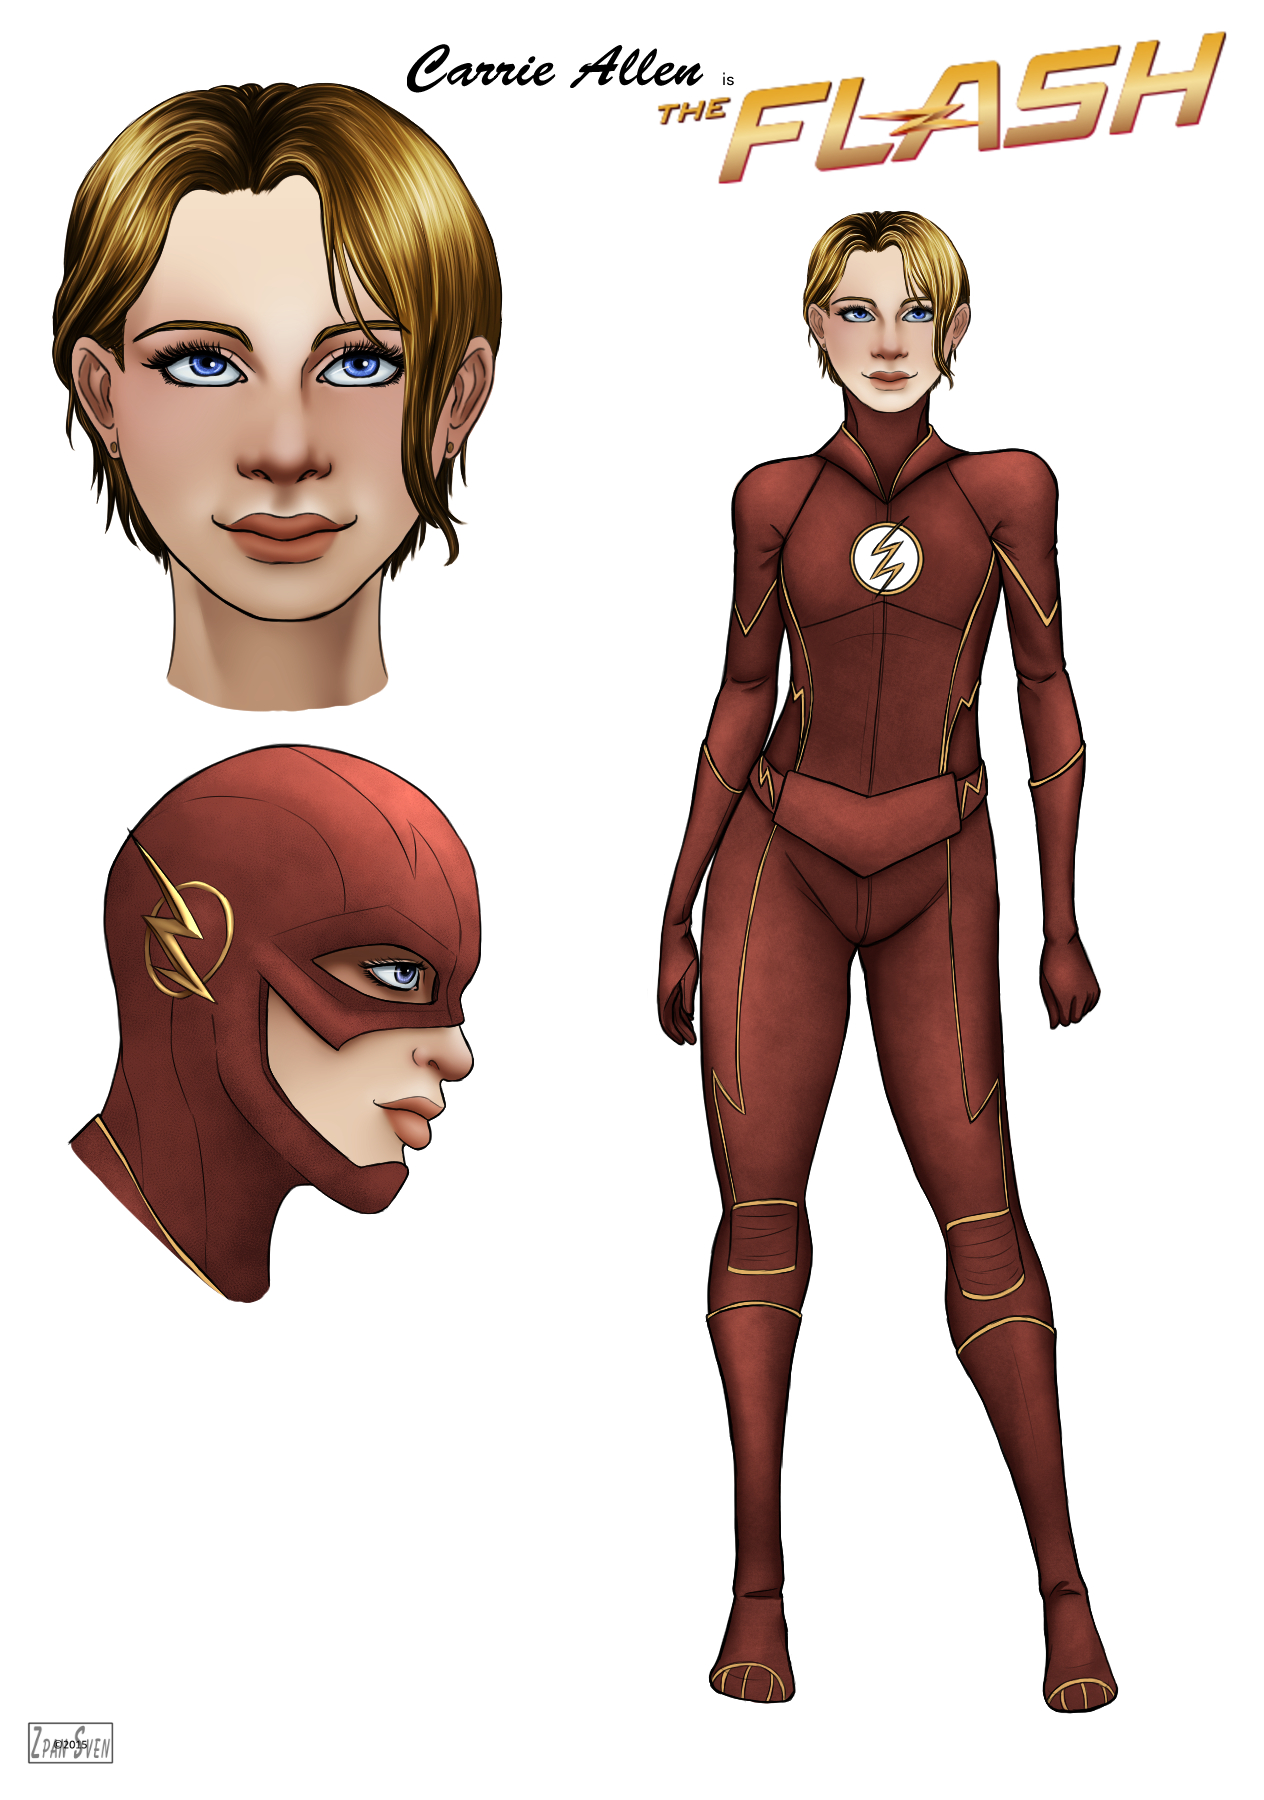 The Flash . Carrie Allen by ZpanSven